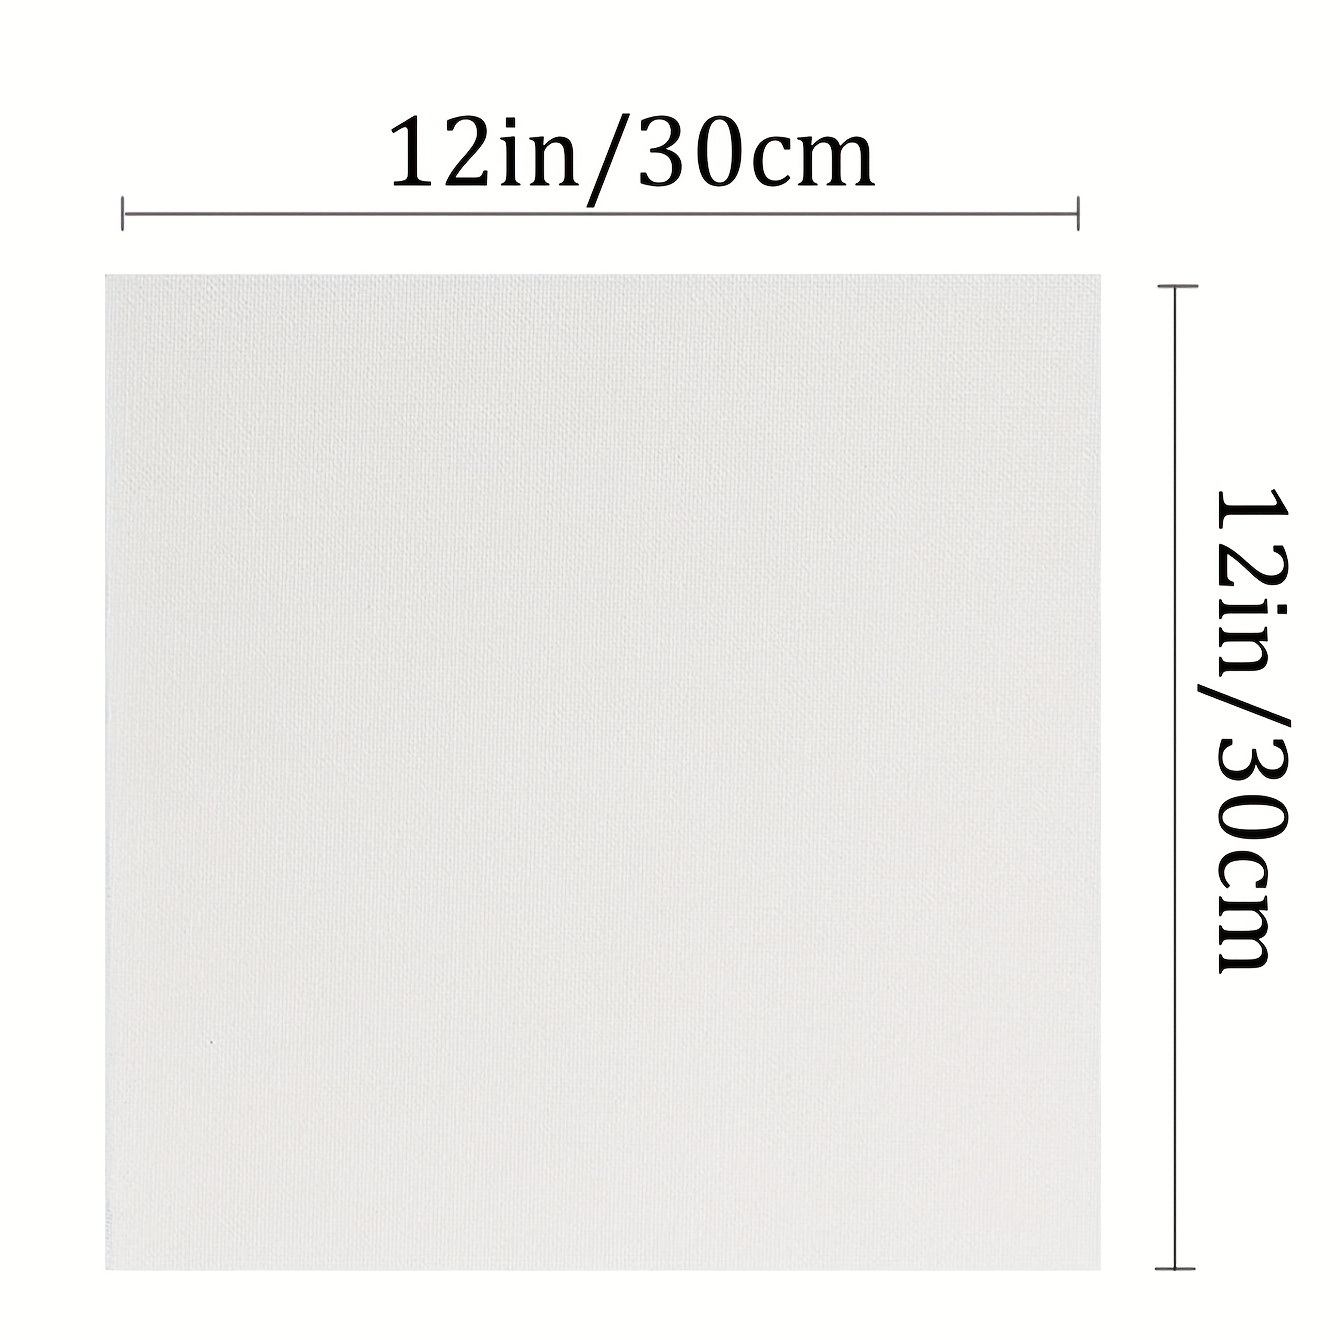 Pack of 4 Stretched Canvases for Painting Primed White 100% Cotton Artist  Blank Canvas Boards for Painting 8 oz Gesso-Primed